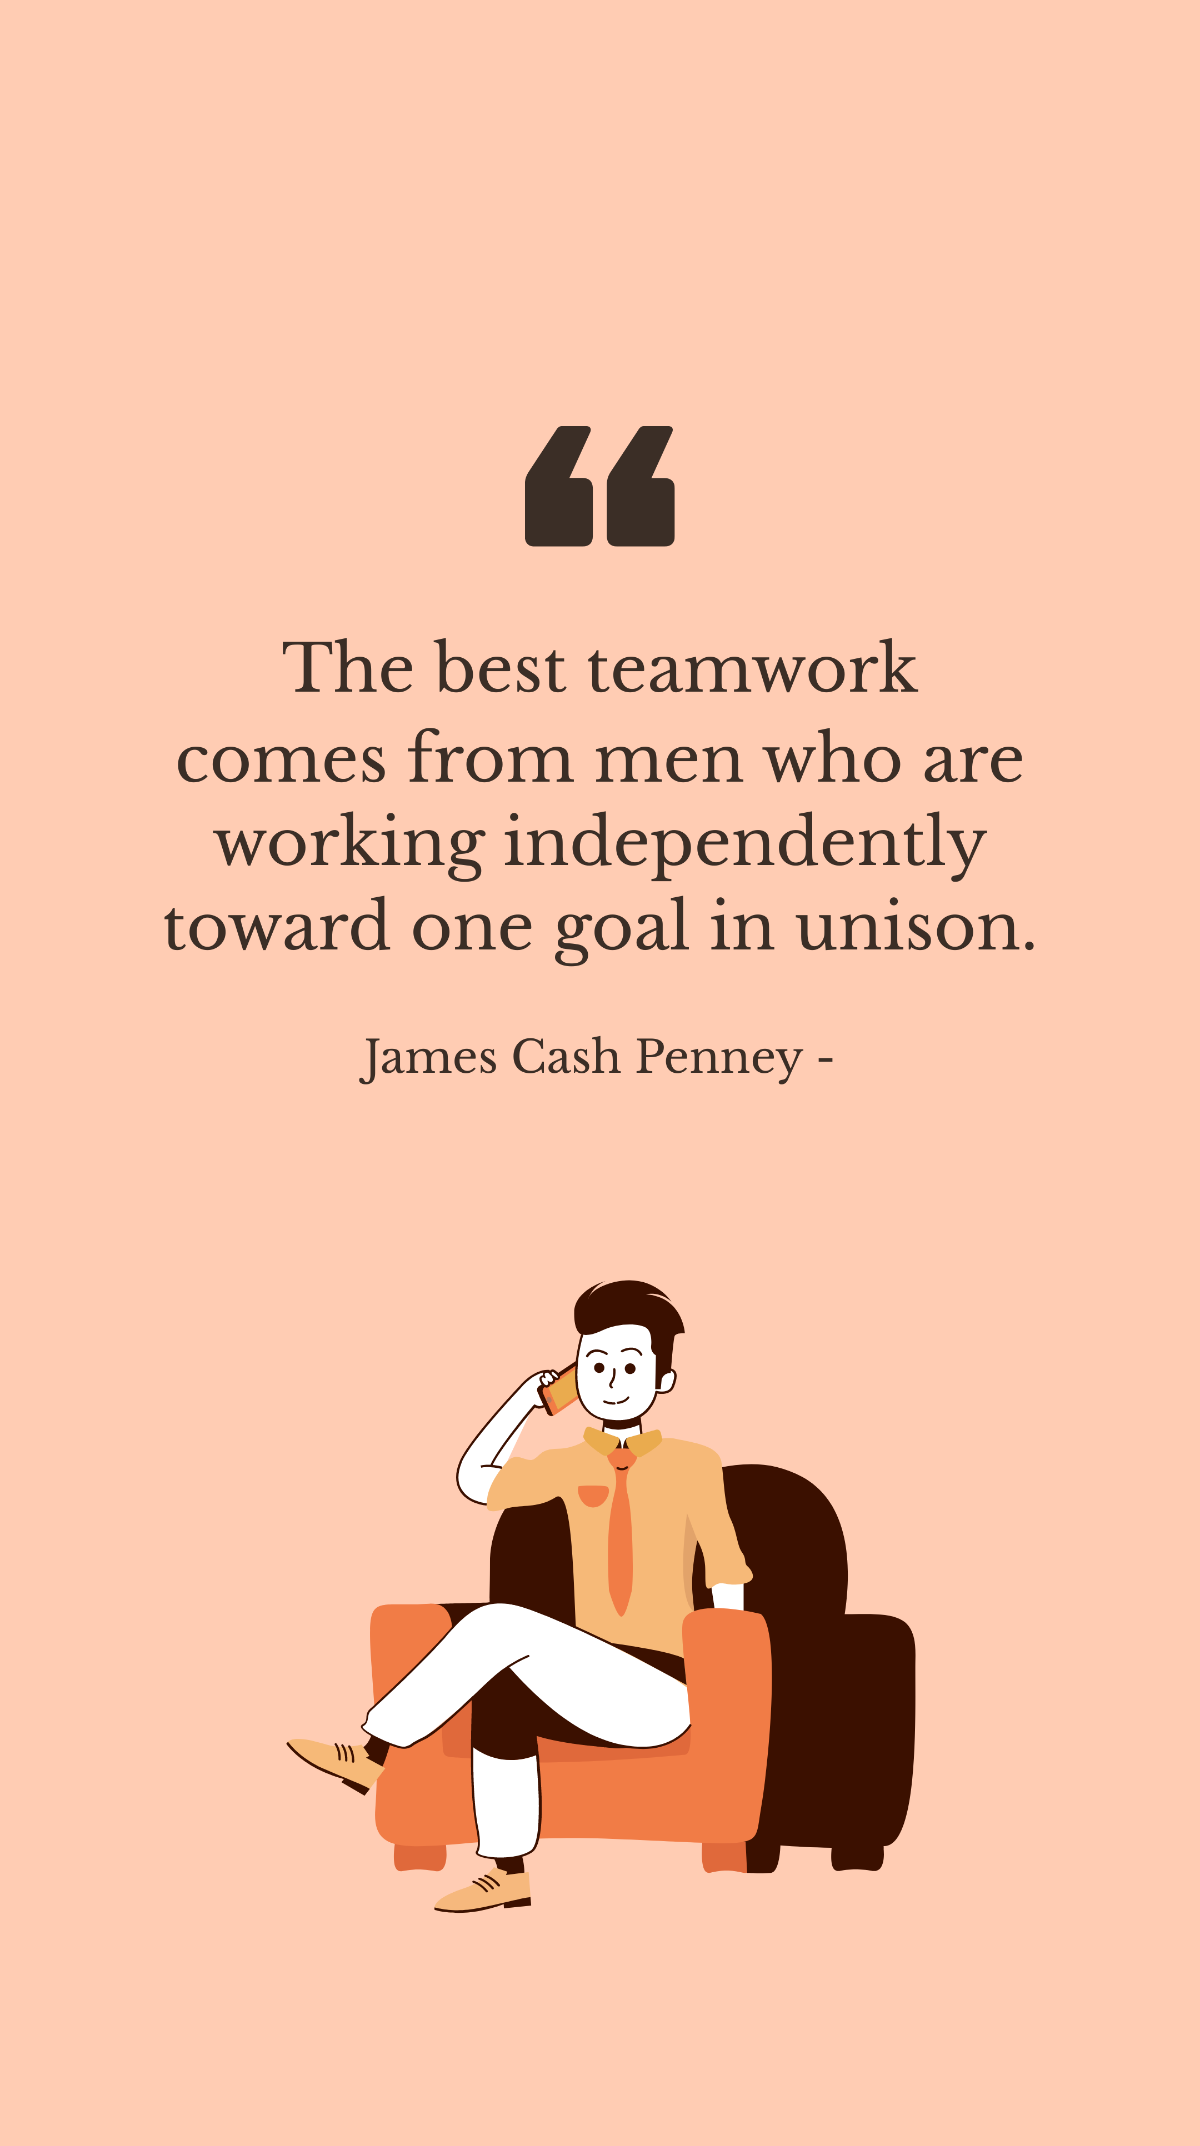 James Cash Penney - The best teamwork comes from men who are working independently toward one goal in unison. Template